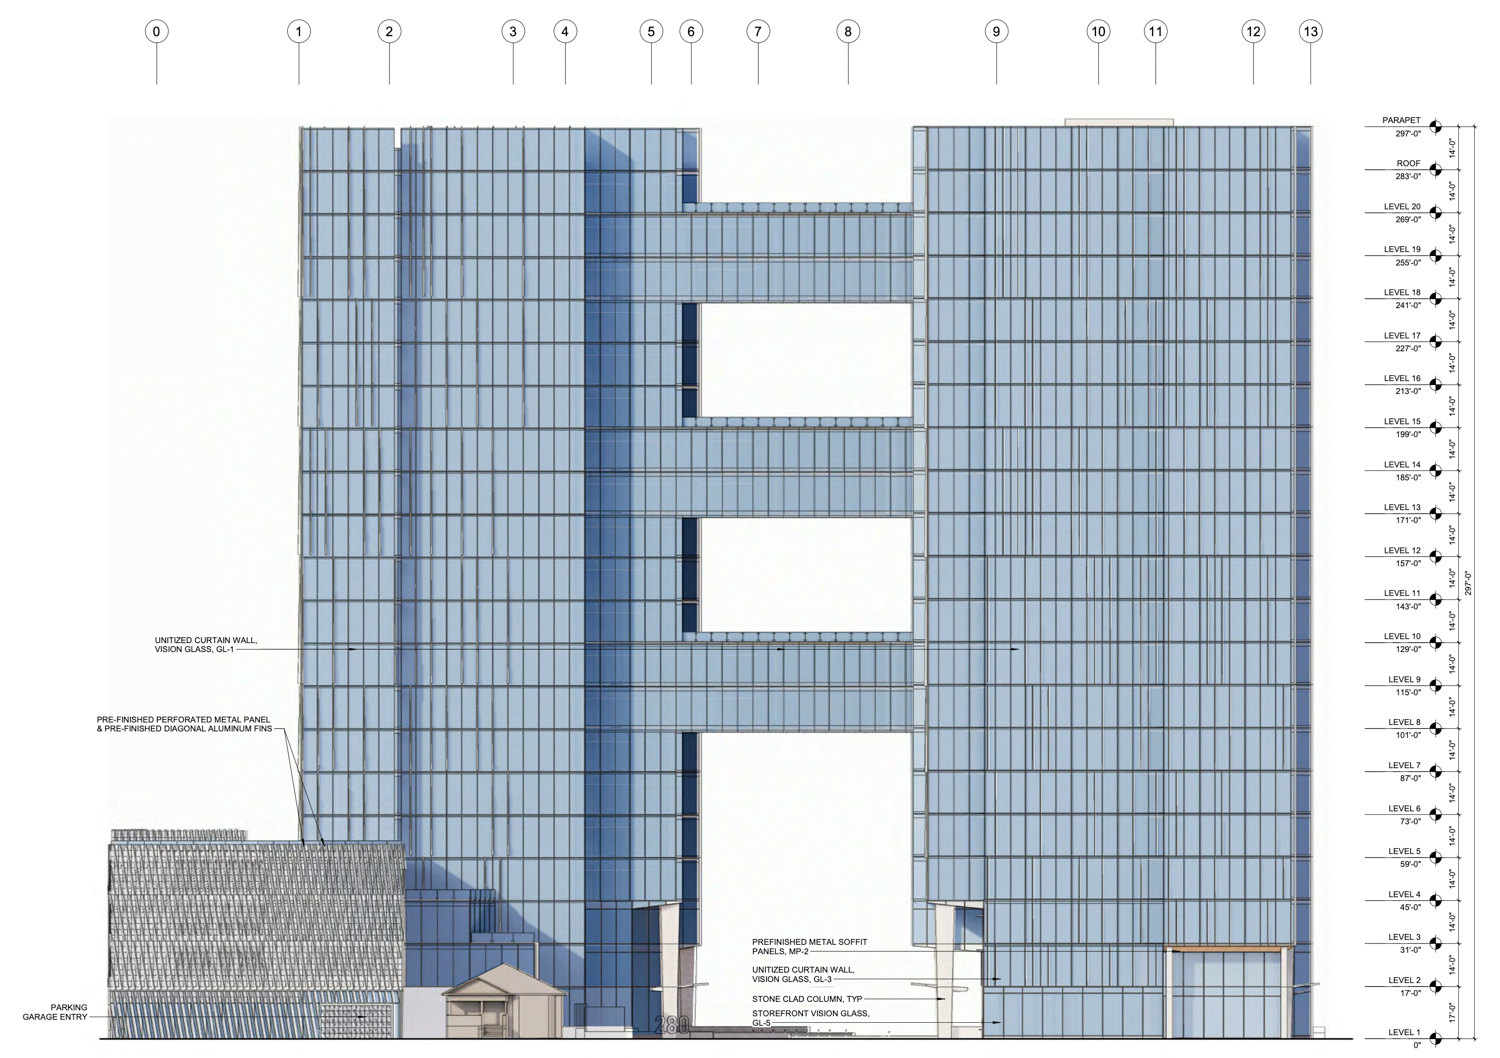 280 Woz Way east side elevation, rendering by C2K Architecture